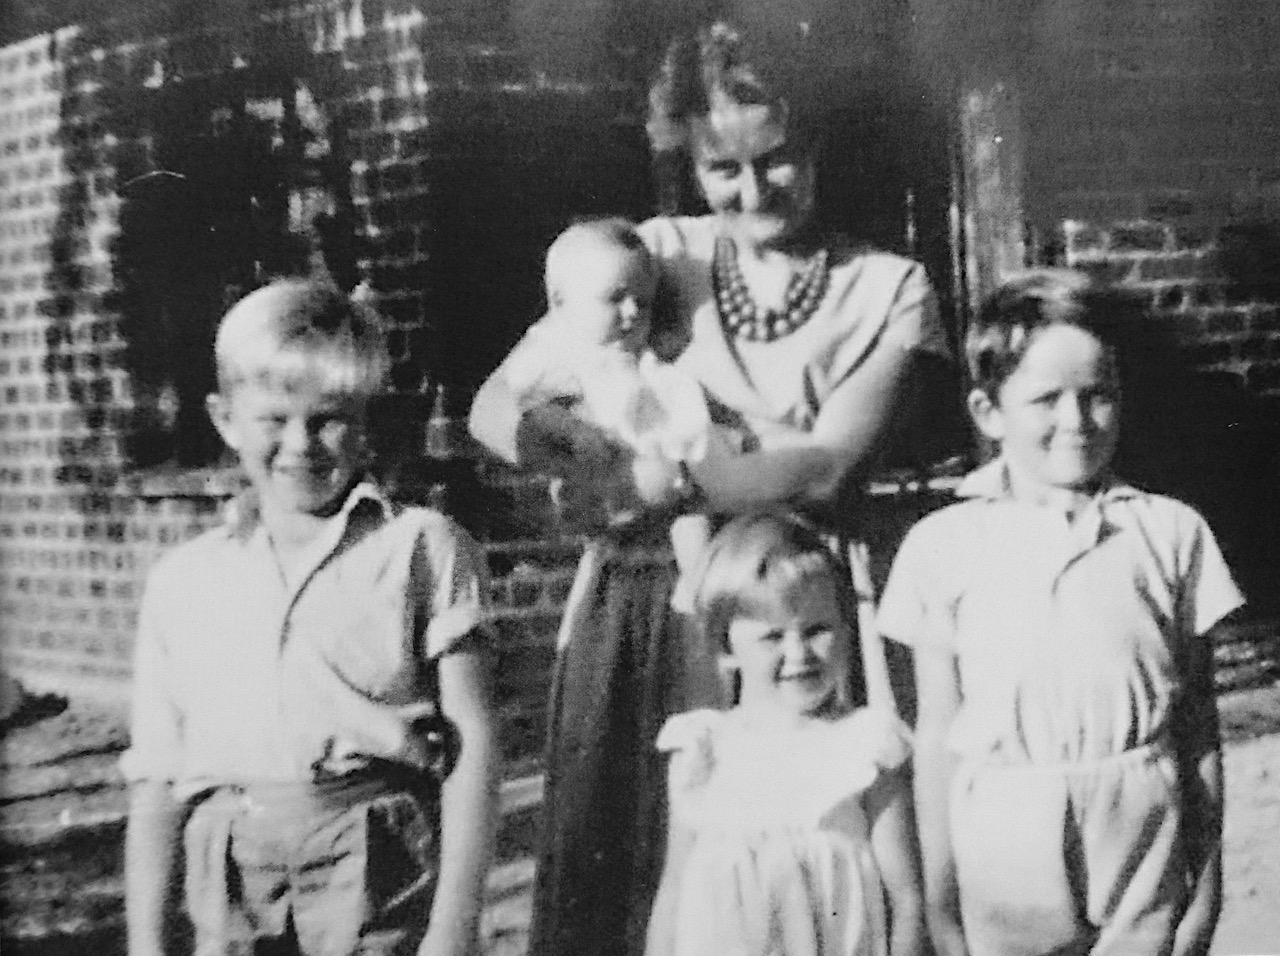 Hanni Aston with her four children, Simon, Chris, Dee and Louise.